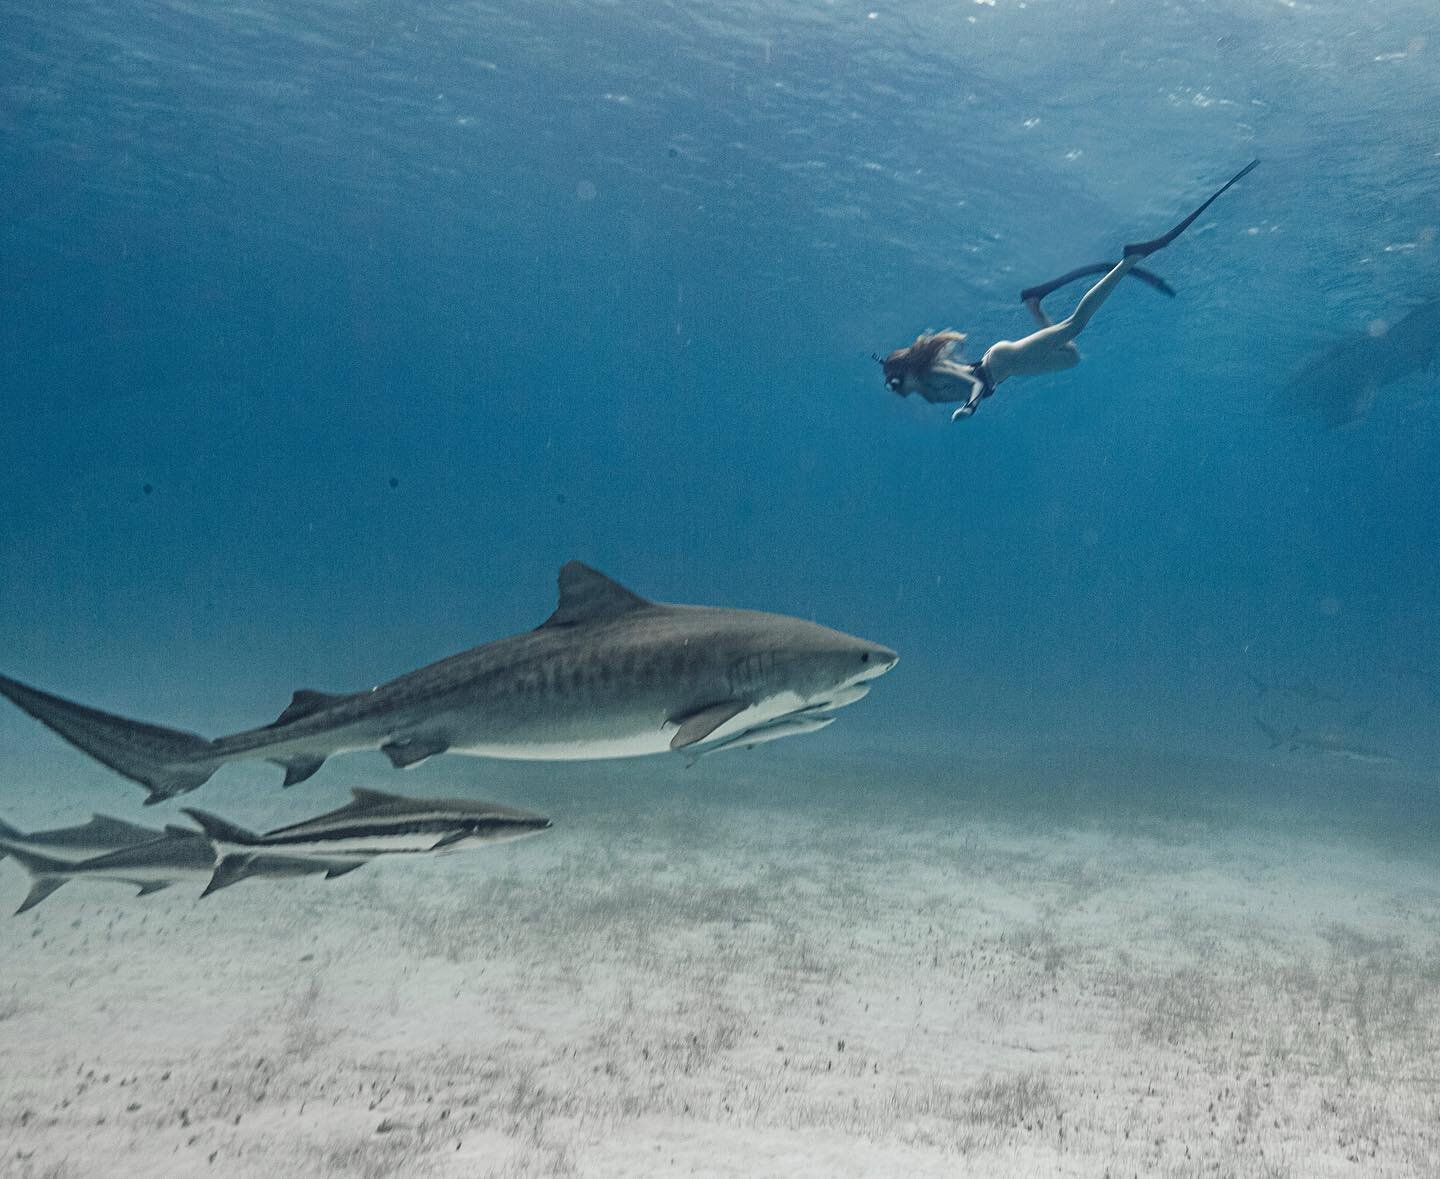 Freediving with a wild tiger shark absolutely brings up fear &hellip; survival fear, fear I&rsquo;ve learned from movies/society, &amp; fear about my own abilities. BUT THEN, step-by-step, those fears crack away &amp; I am able to expand into literal